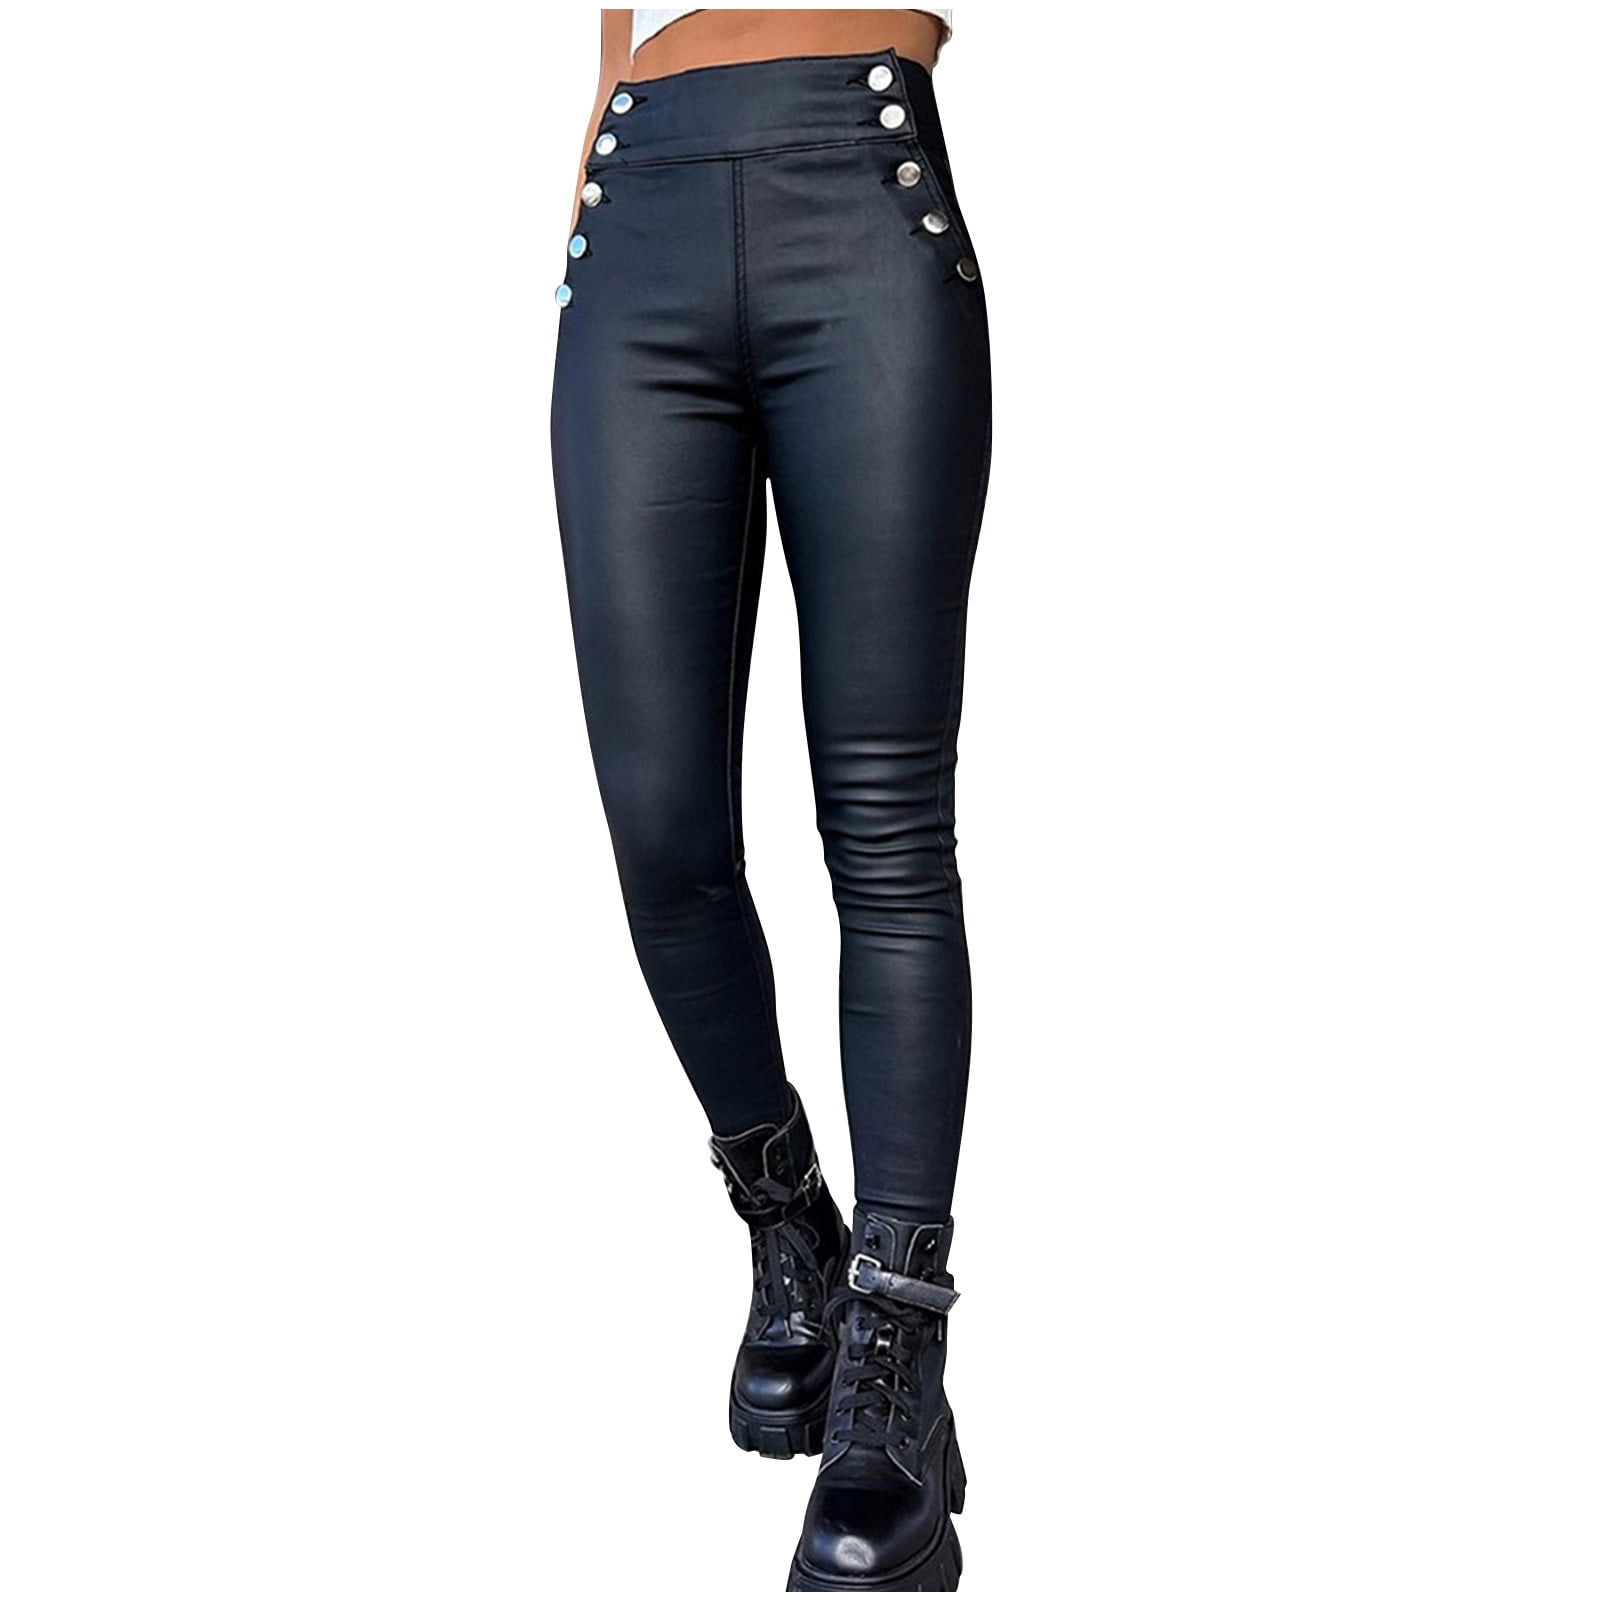 Yogaworld Matte Leather Yoga Lyra Leggings Price For Women Slim Fit, Hip  Shaping, High Waist, Autumn/Winter Fitness Pants For Running, Fitness, And  Jogging From Apparel8296, $14.49